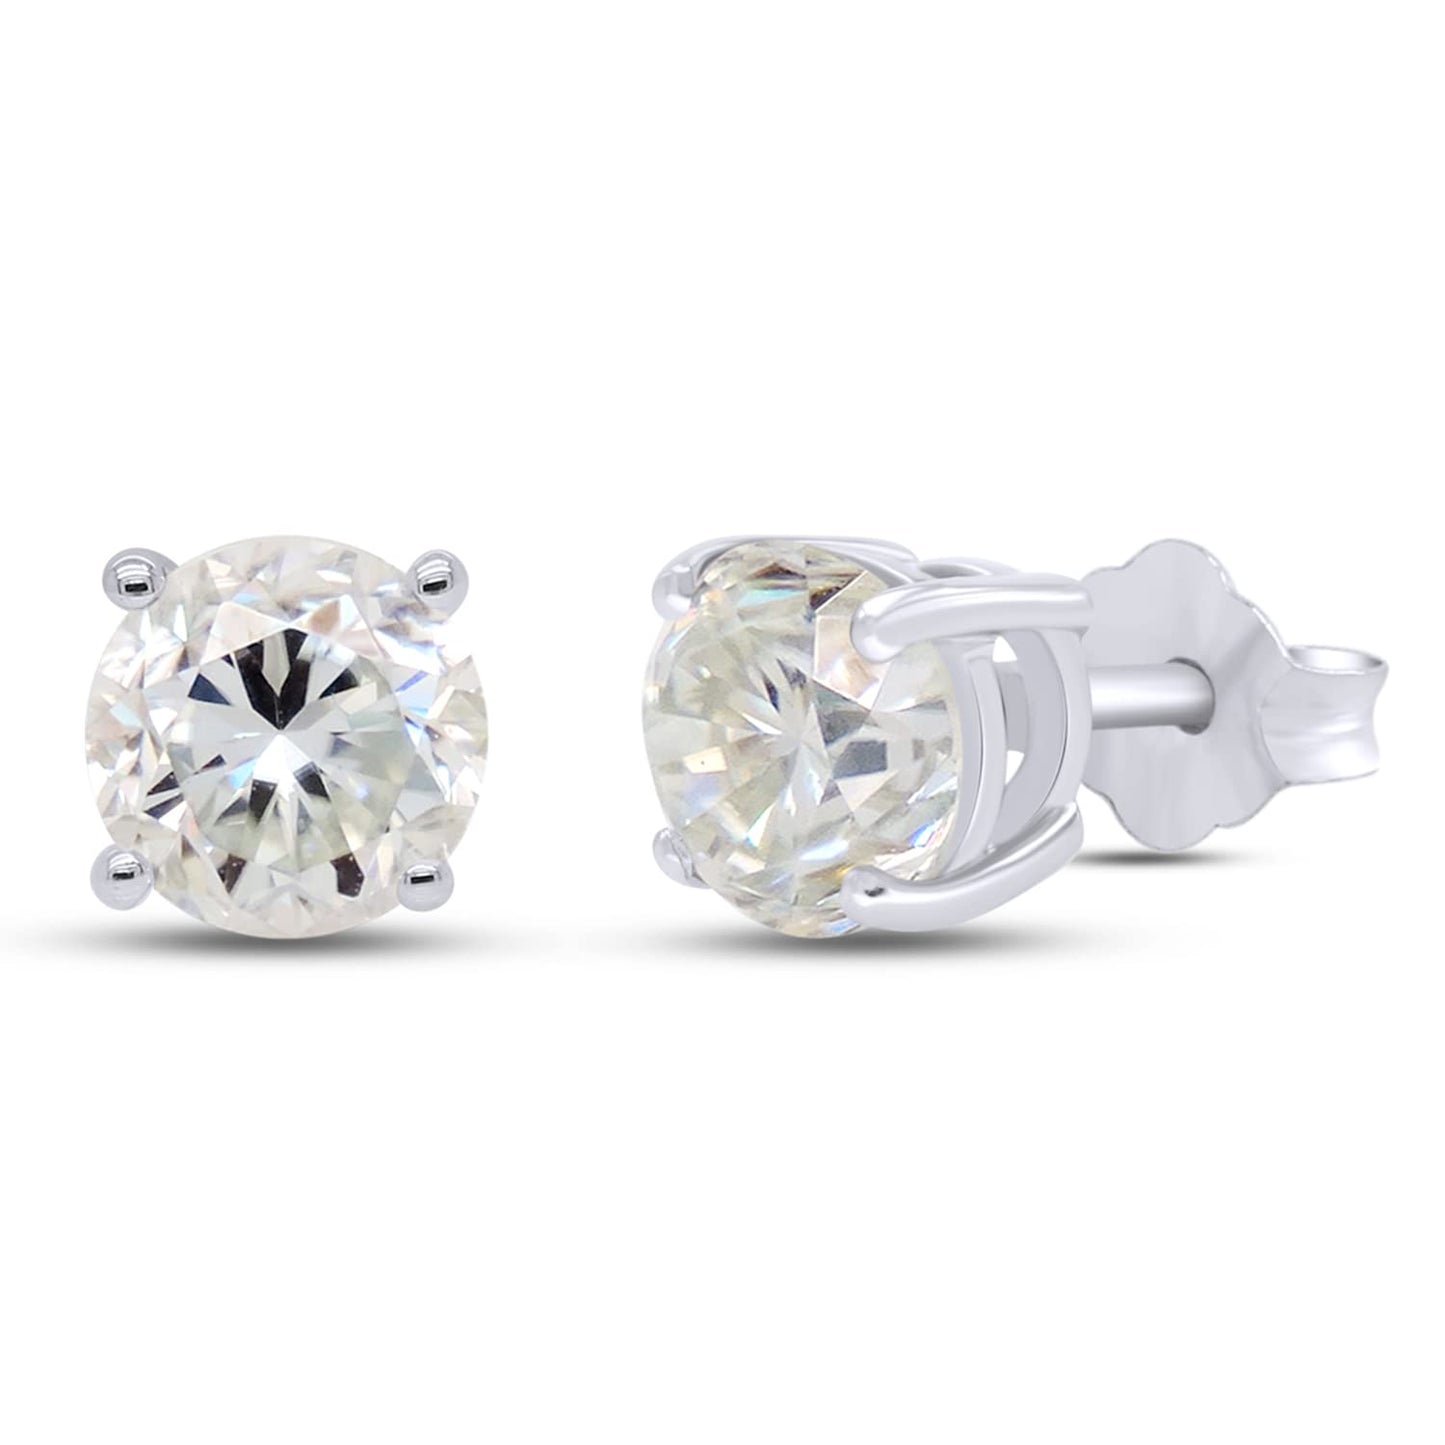 9.5MM Round Cut Lab Created Moissanite Diamond Solitaire Stud Earrings In 925 Sterling Silver Jewelry For Women (6 Cttw)